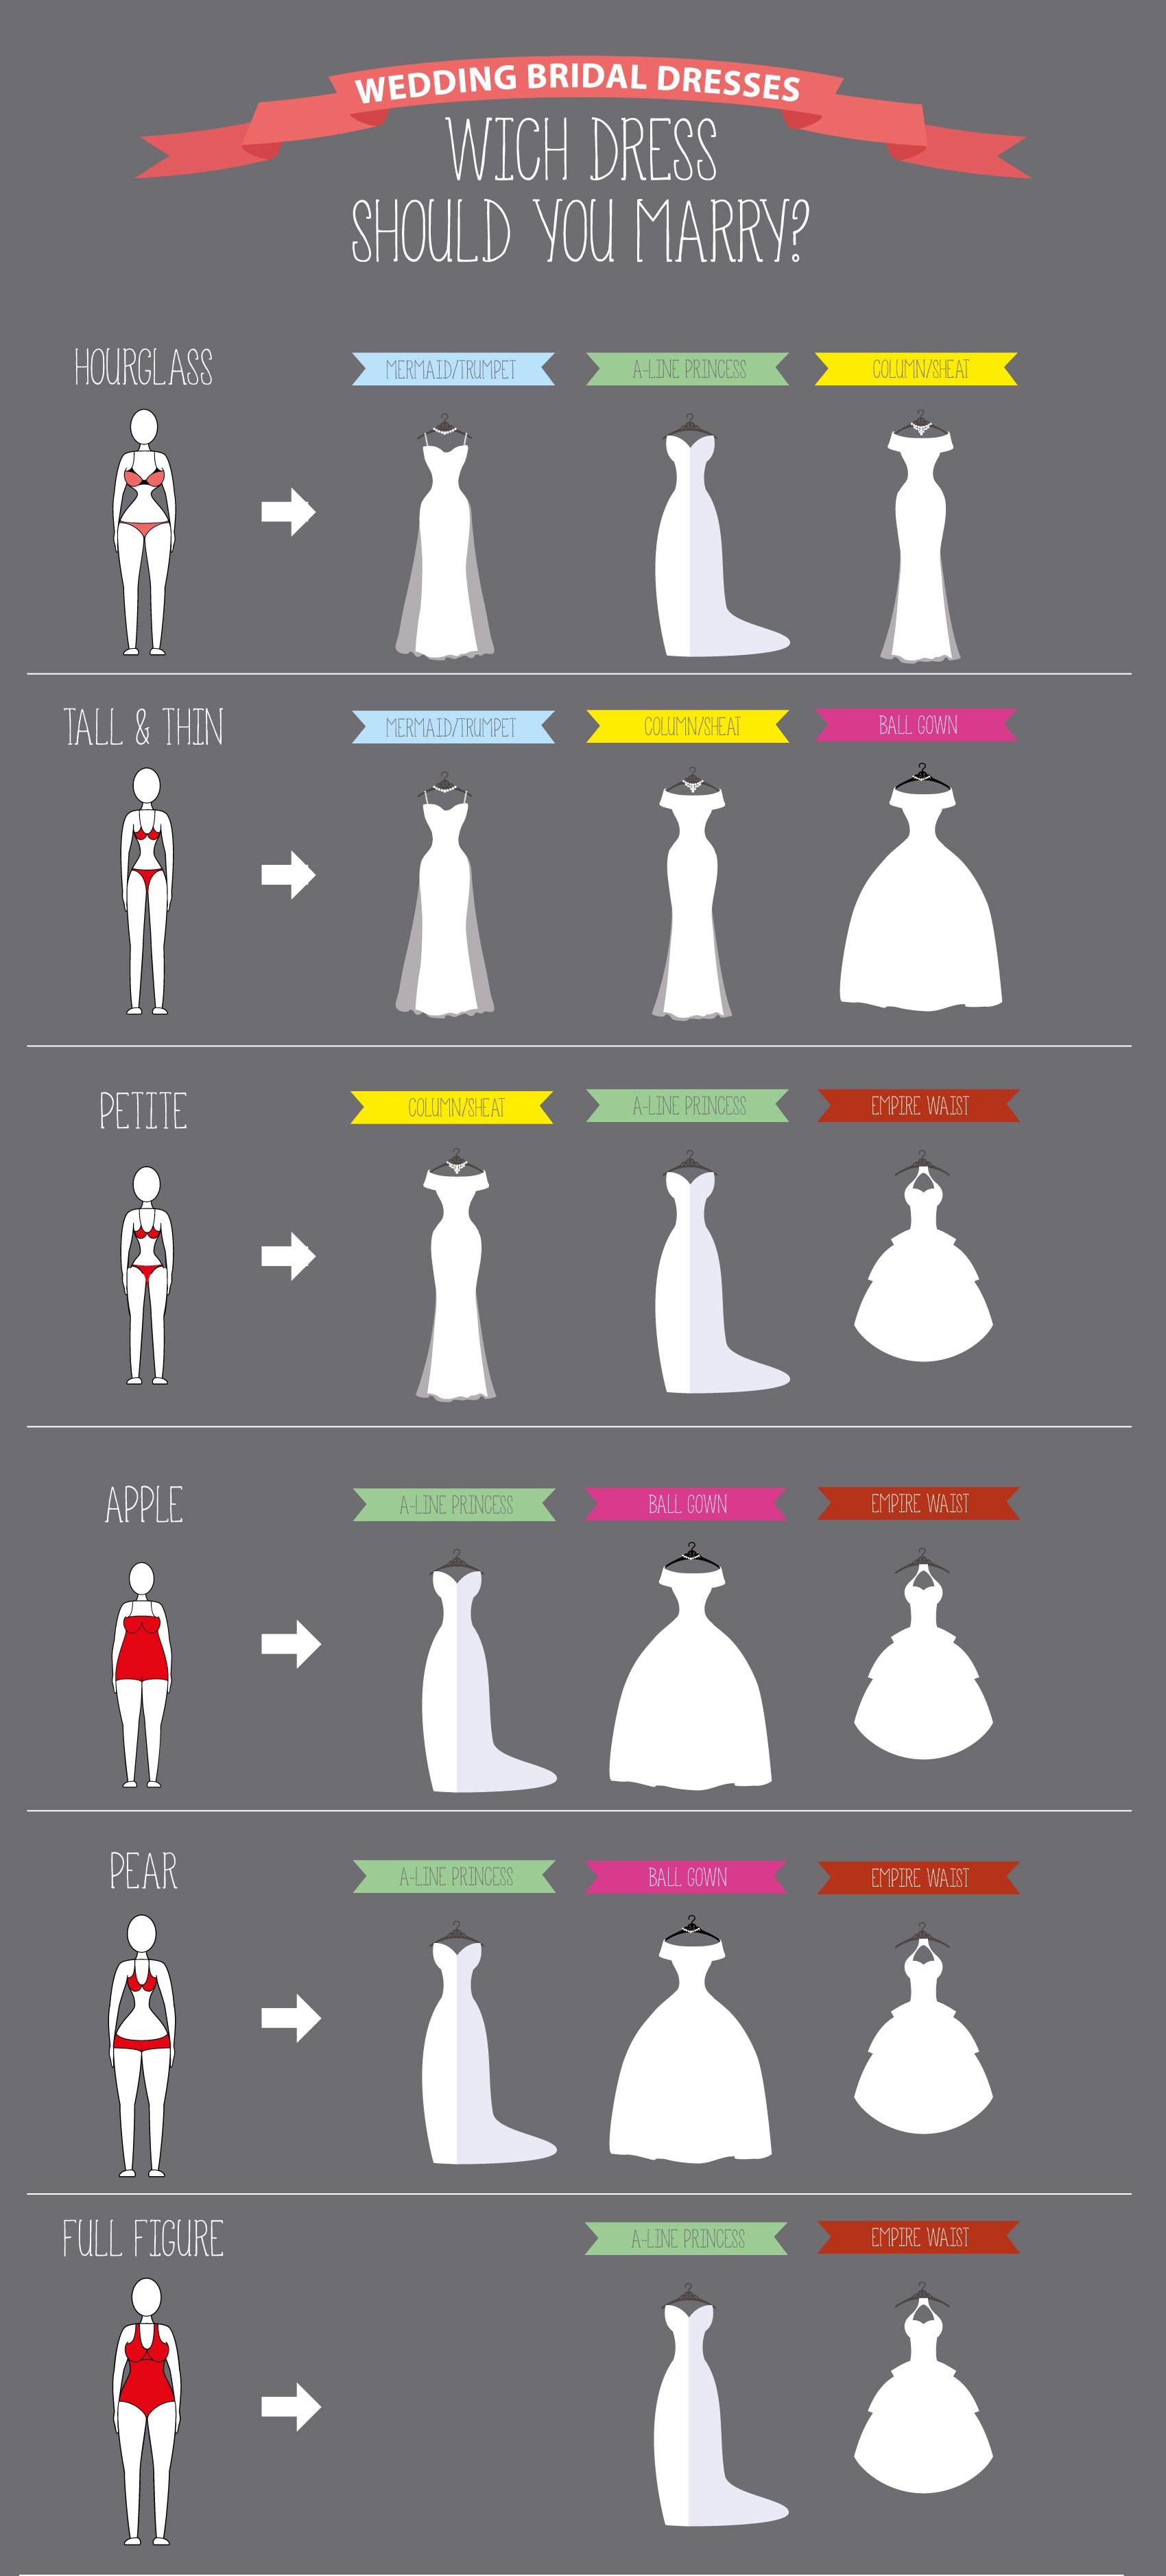 What’s Your Wedding Dress Style